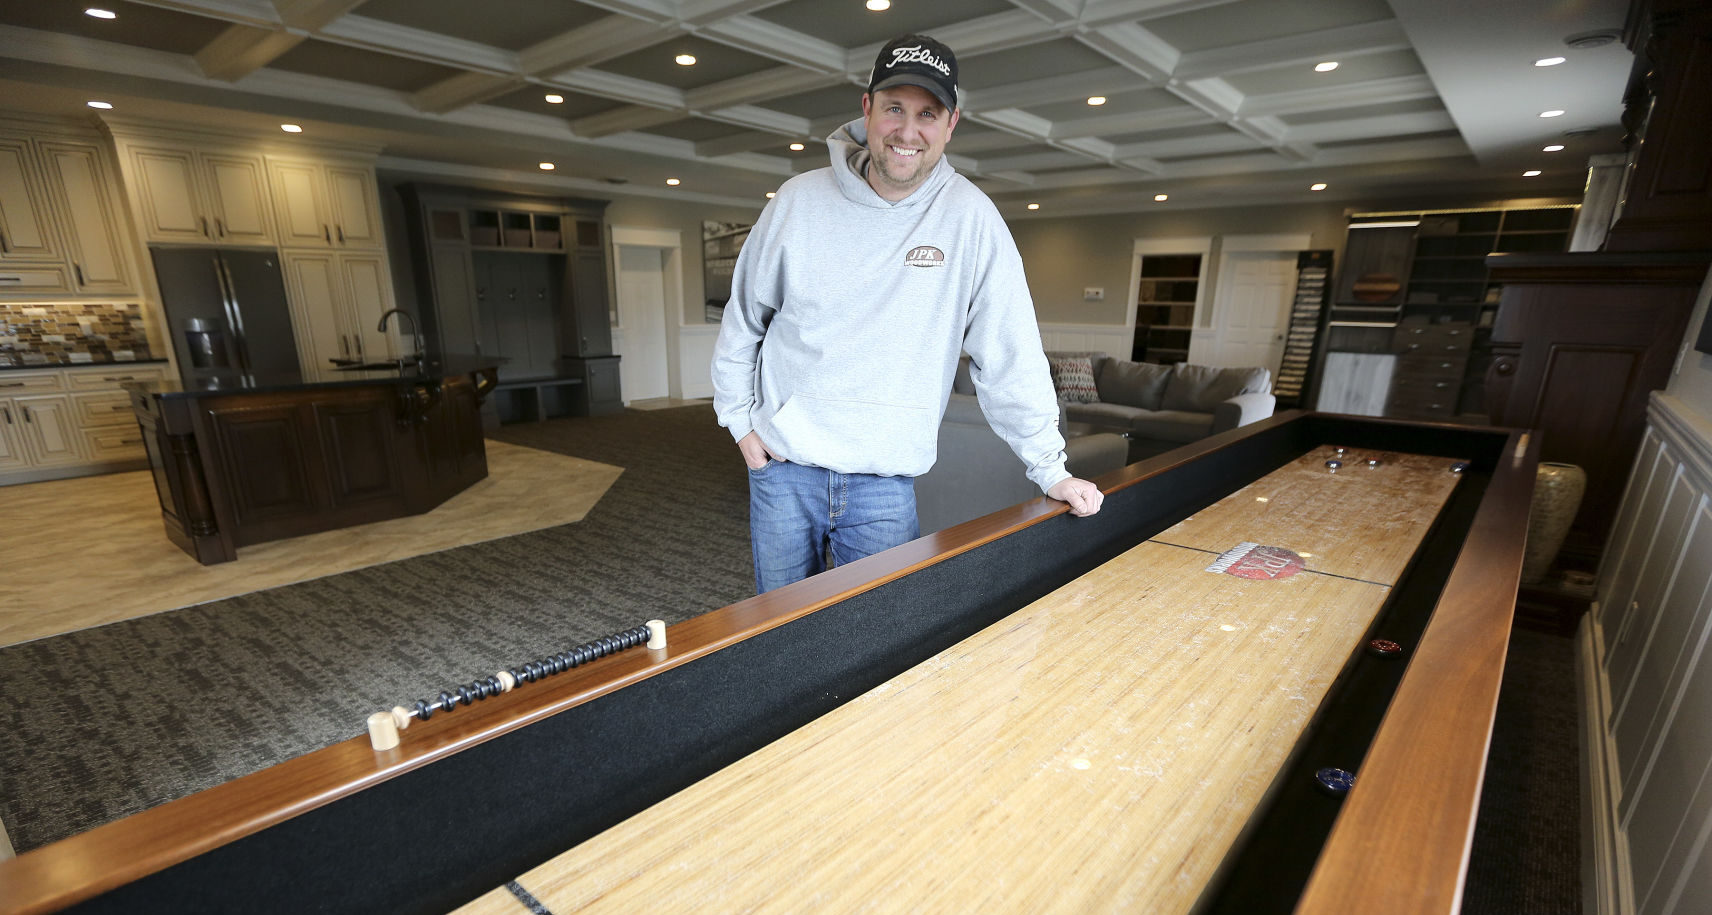 Jon Kluck, owner of JPK Woodworks, stands in his showroom Monday at 8005 Seippel Court in Dubuque. PHOTO CREDIT: Dave Kettering